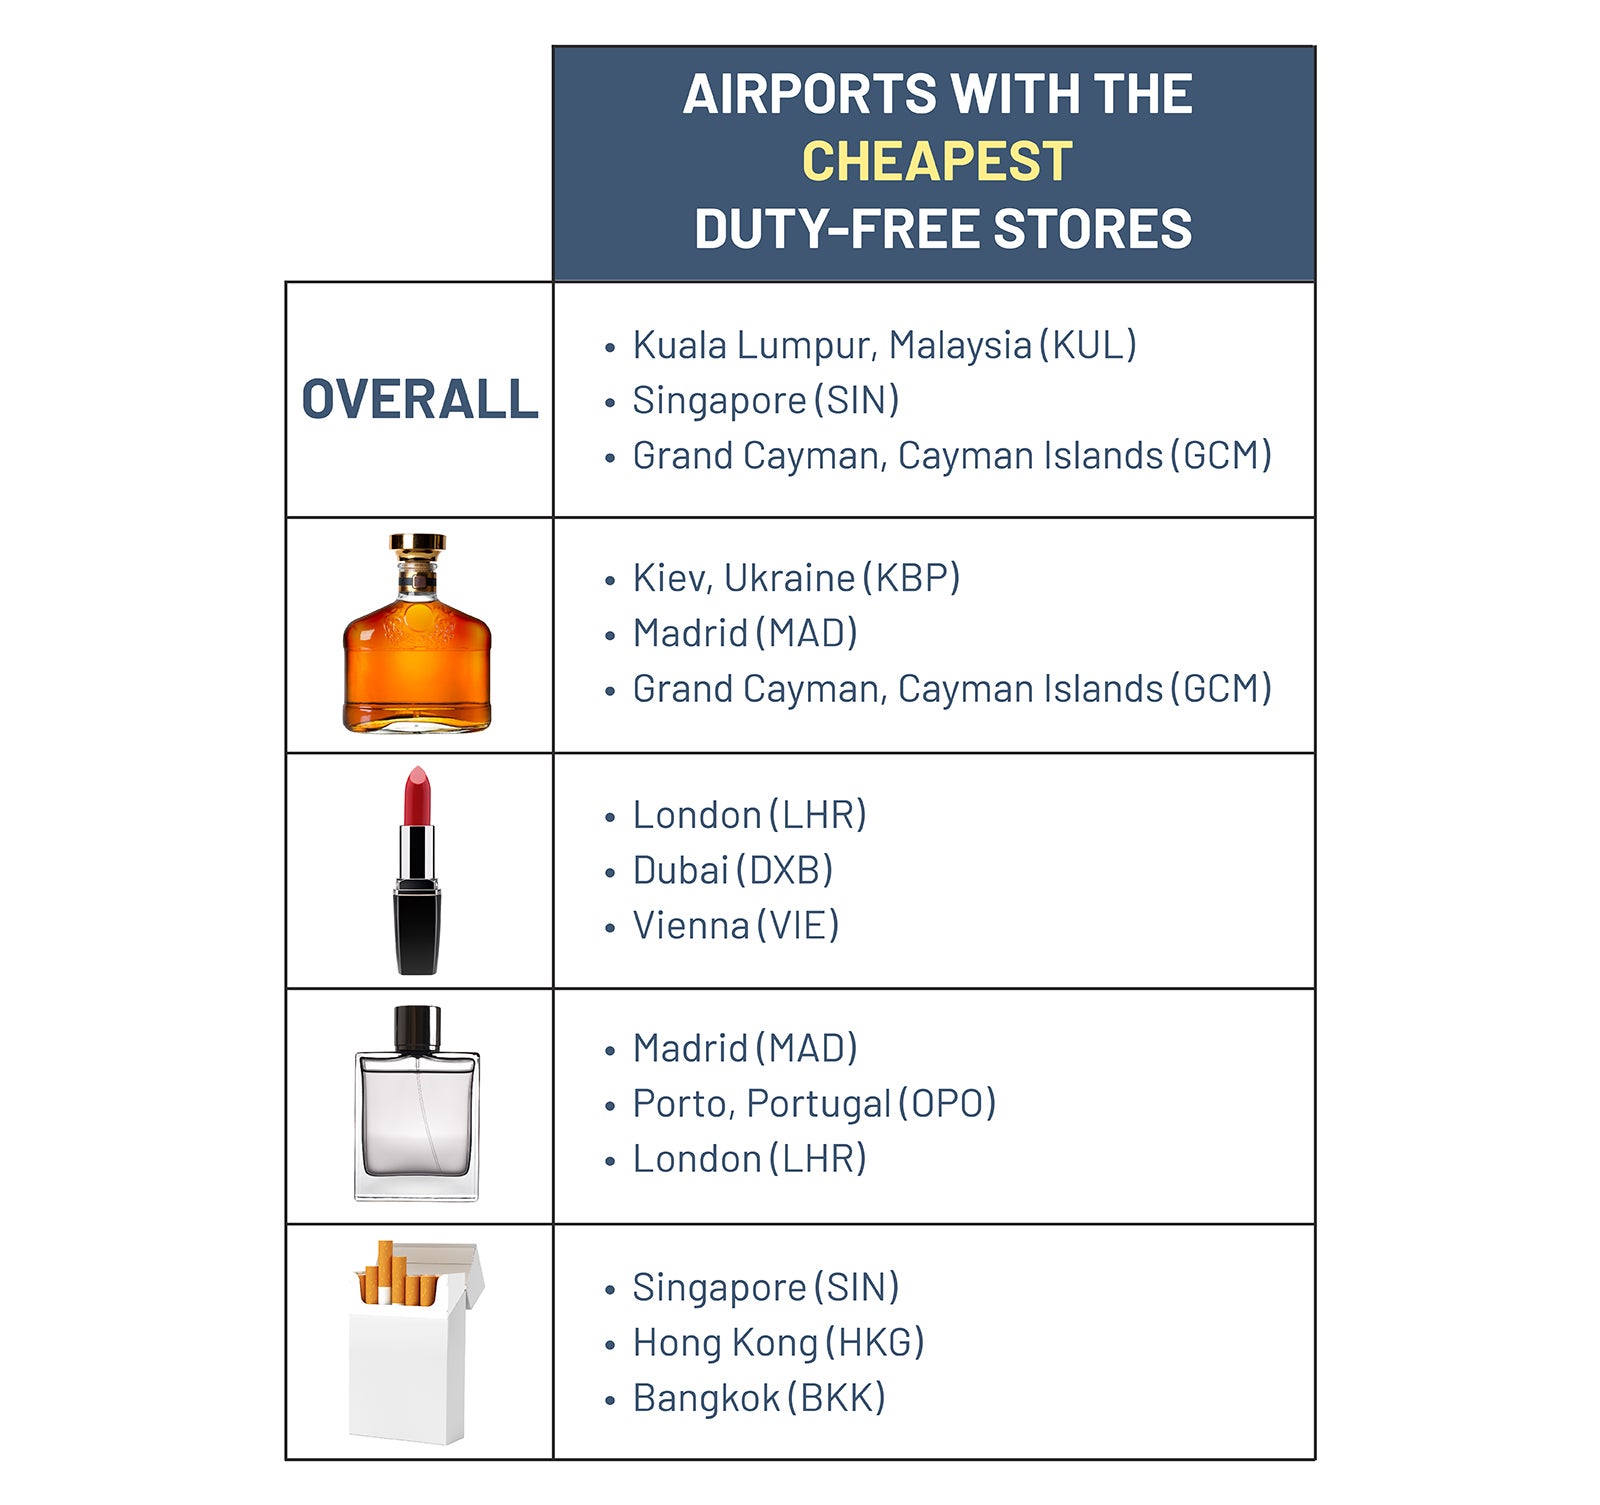 The ultimate comparison guide to airport duty-free shopping - The